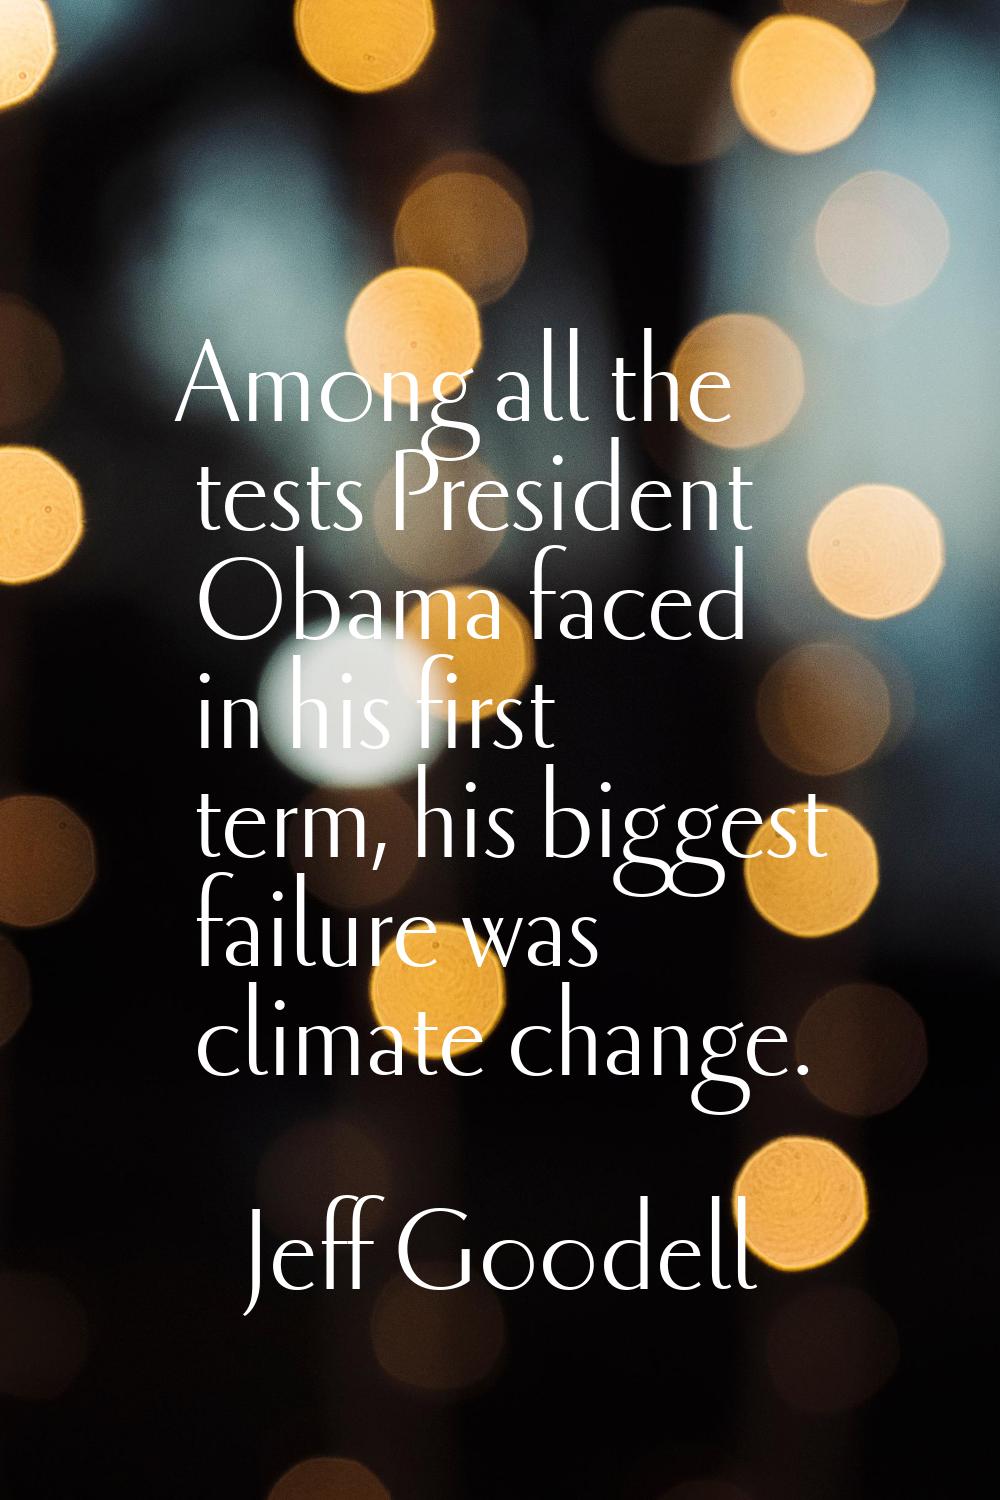 Among all the tests President Obama faced in his first term, his biggest failure was climate change